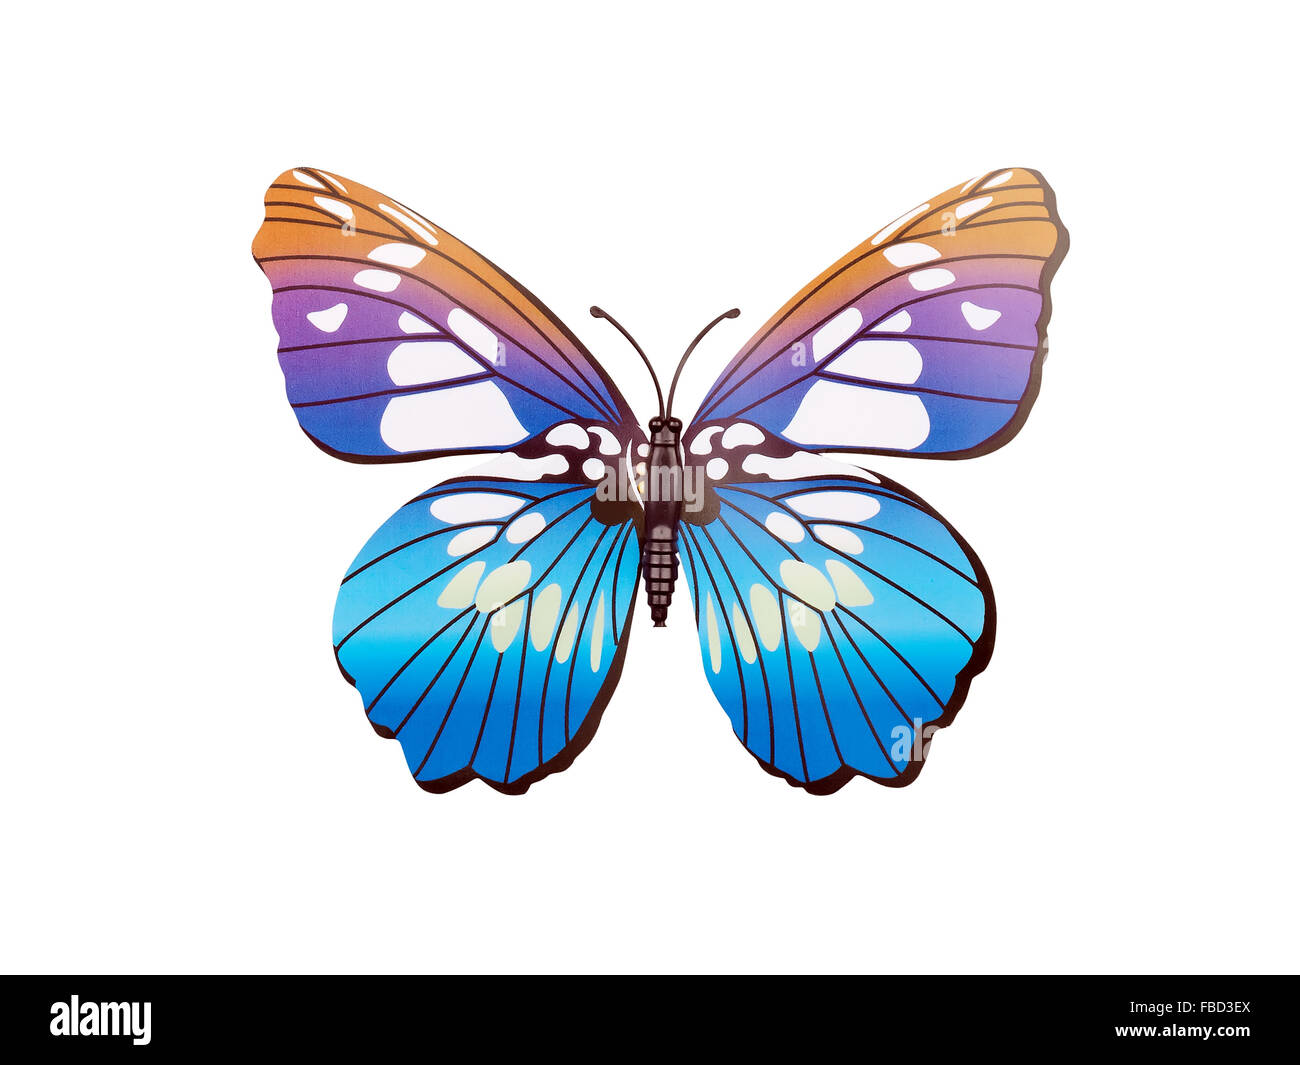 butterfly wall sticker isolated on white background Stock Photo